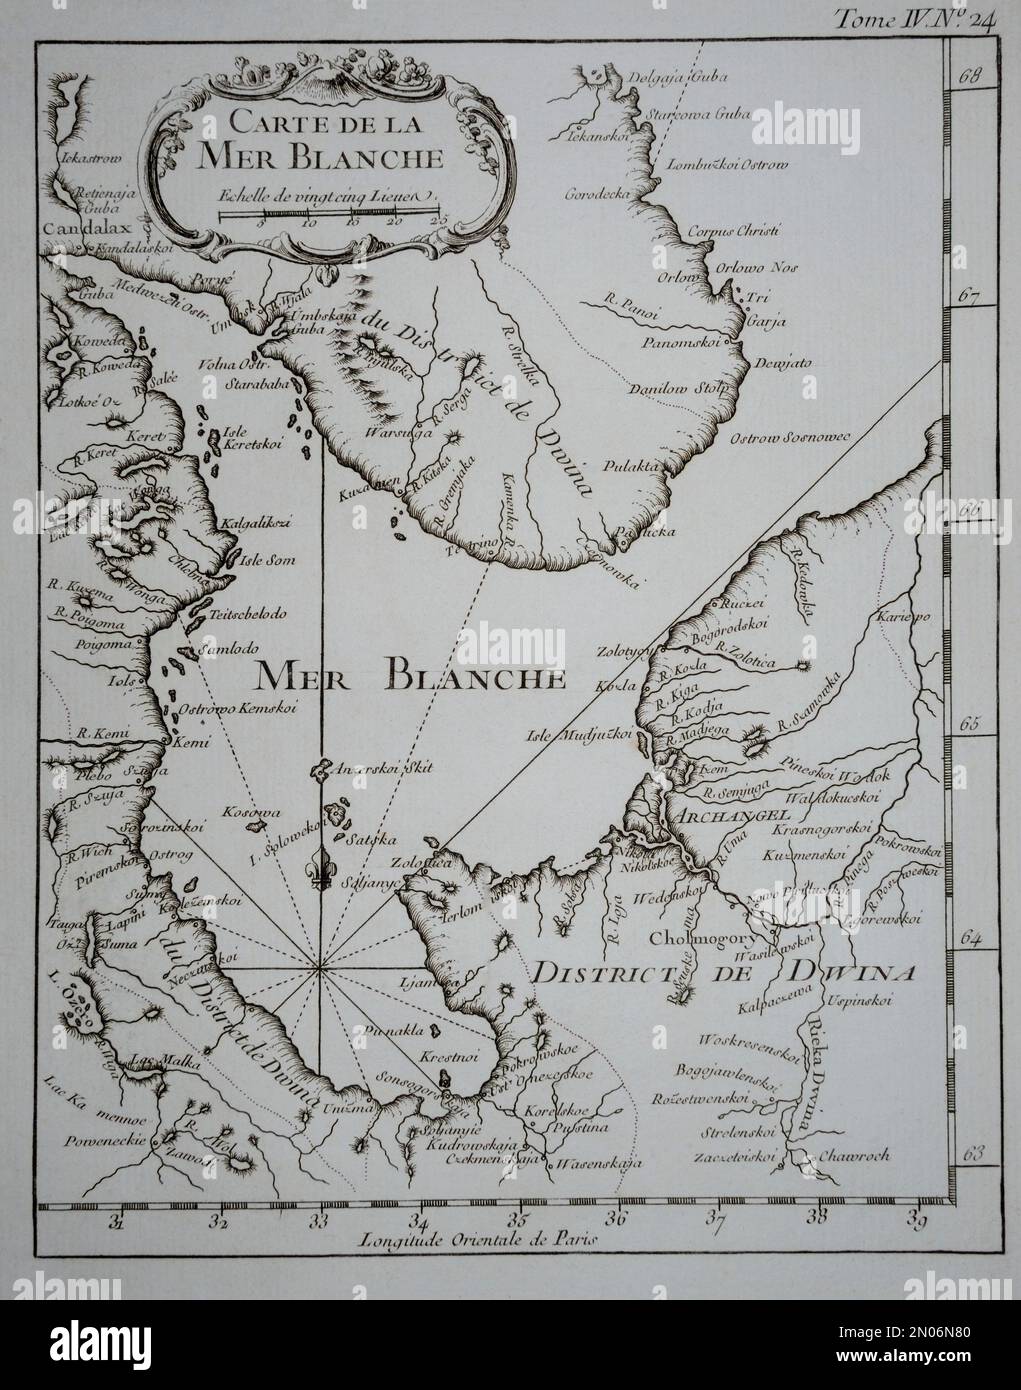 Carte de la Mer Blance by Jacques-Nicolas Bellin, 1764. This Bellin (1703-1772) map gives to you detailed understanding the Kingdom of Biarmia. The Ki Stock Photo